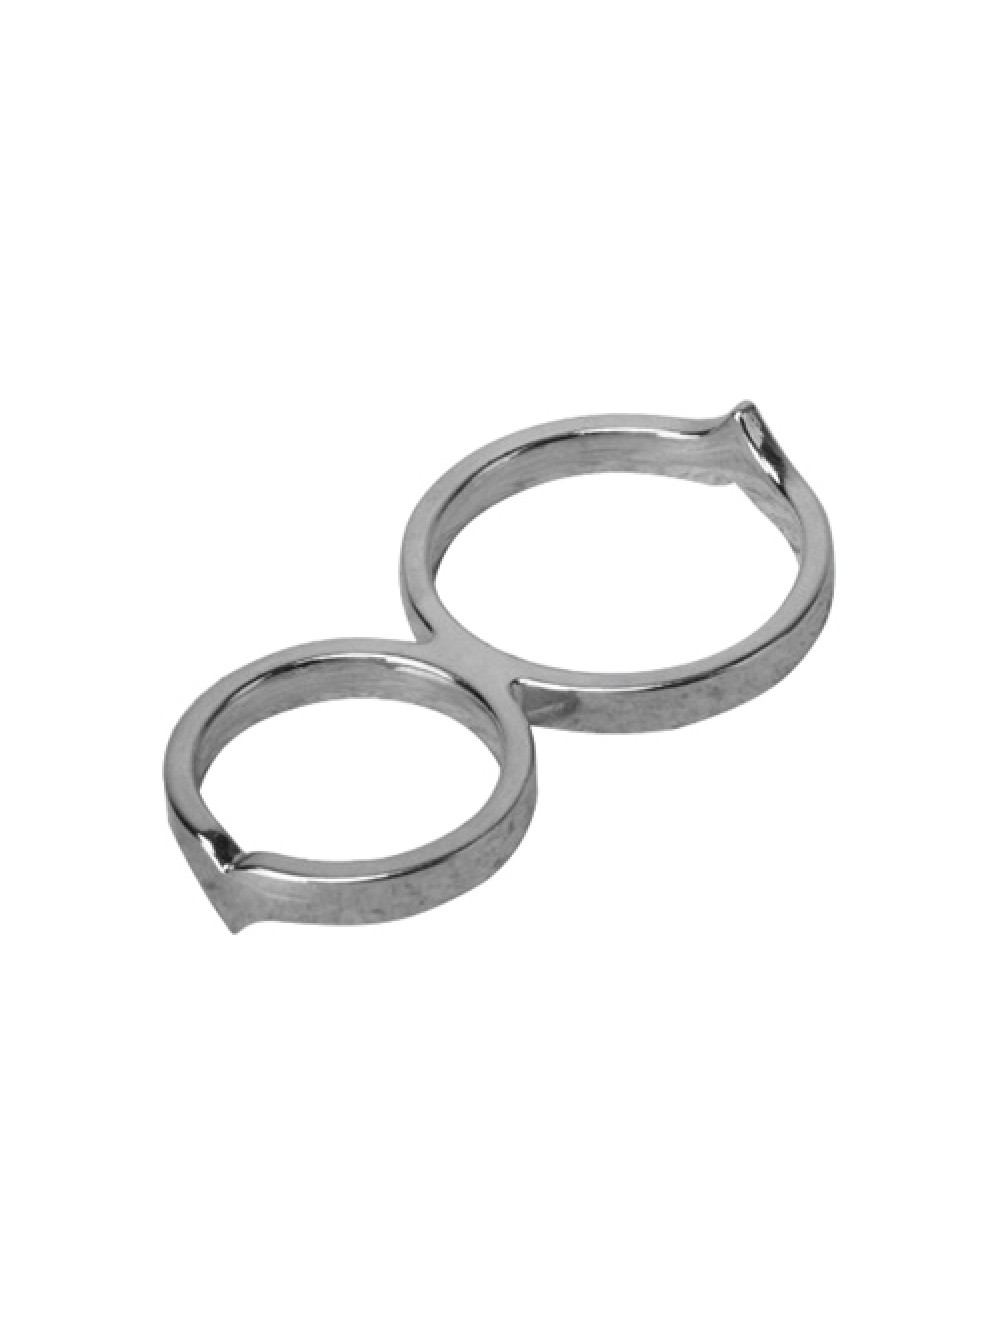 The Twisted Penis Chastity Cock Ring